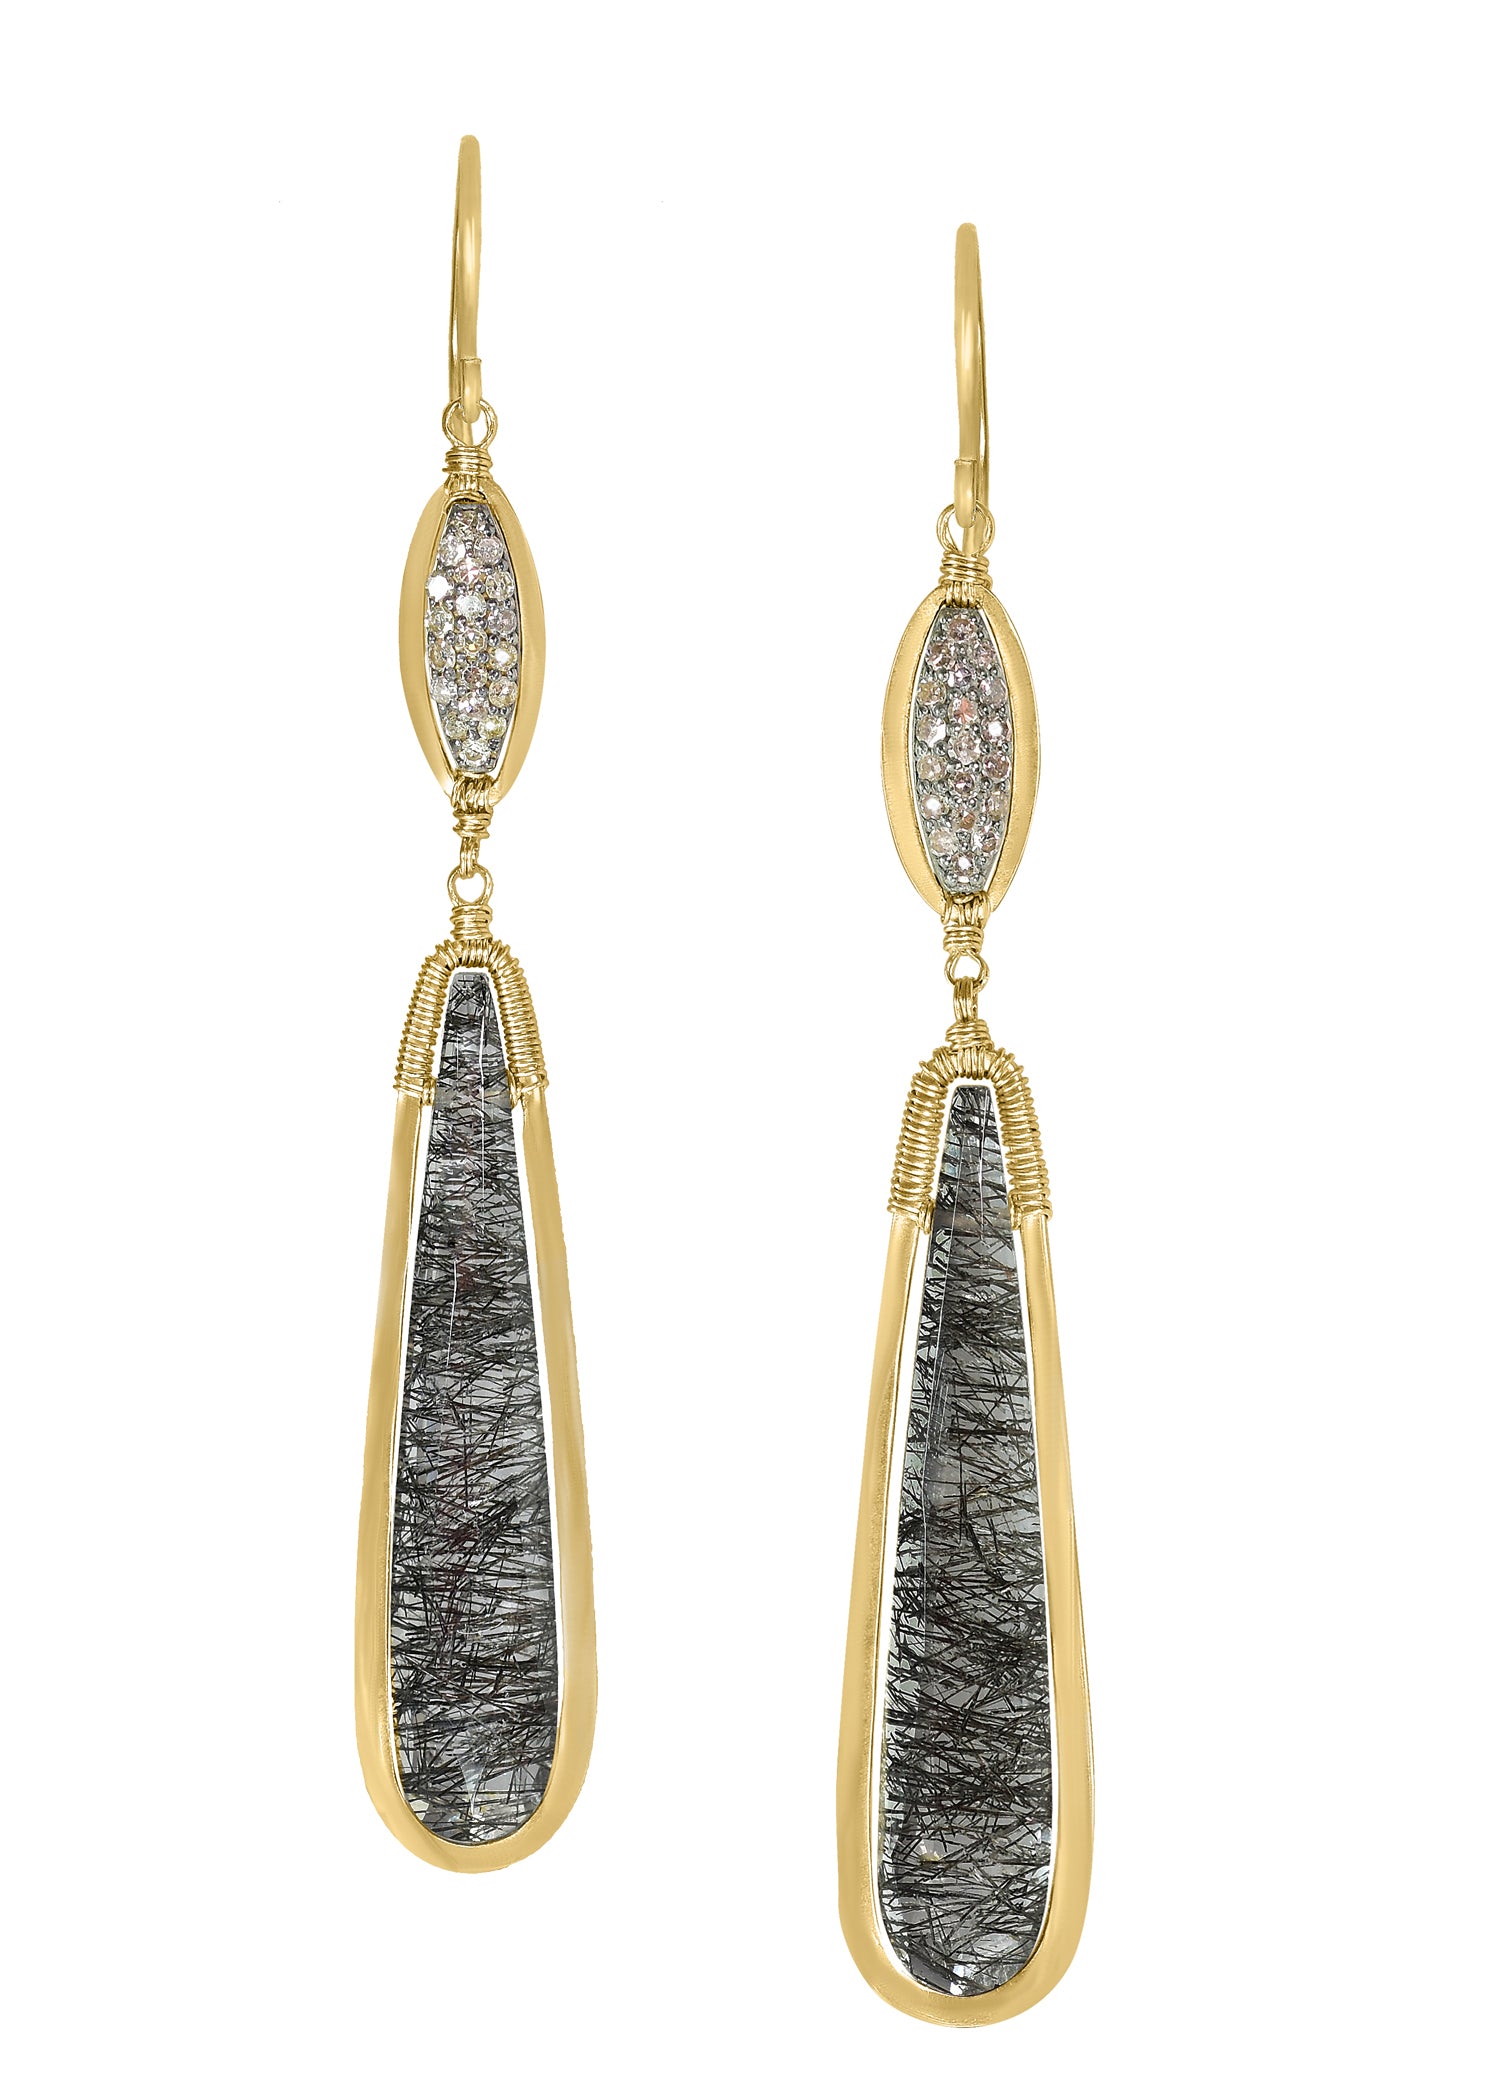 Diamond Black tourmalated quartz 14k gold Sterling silver Mixed metal Special order only Earrings measure 2-11/16" in length (including the ear wires) and 3/8" in width at the widest point Handmade in our Los Angeles studio